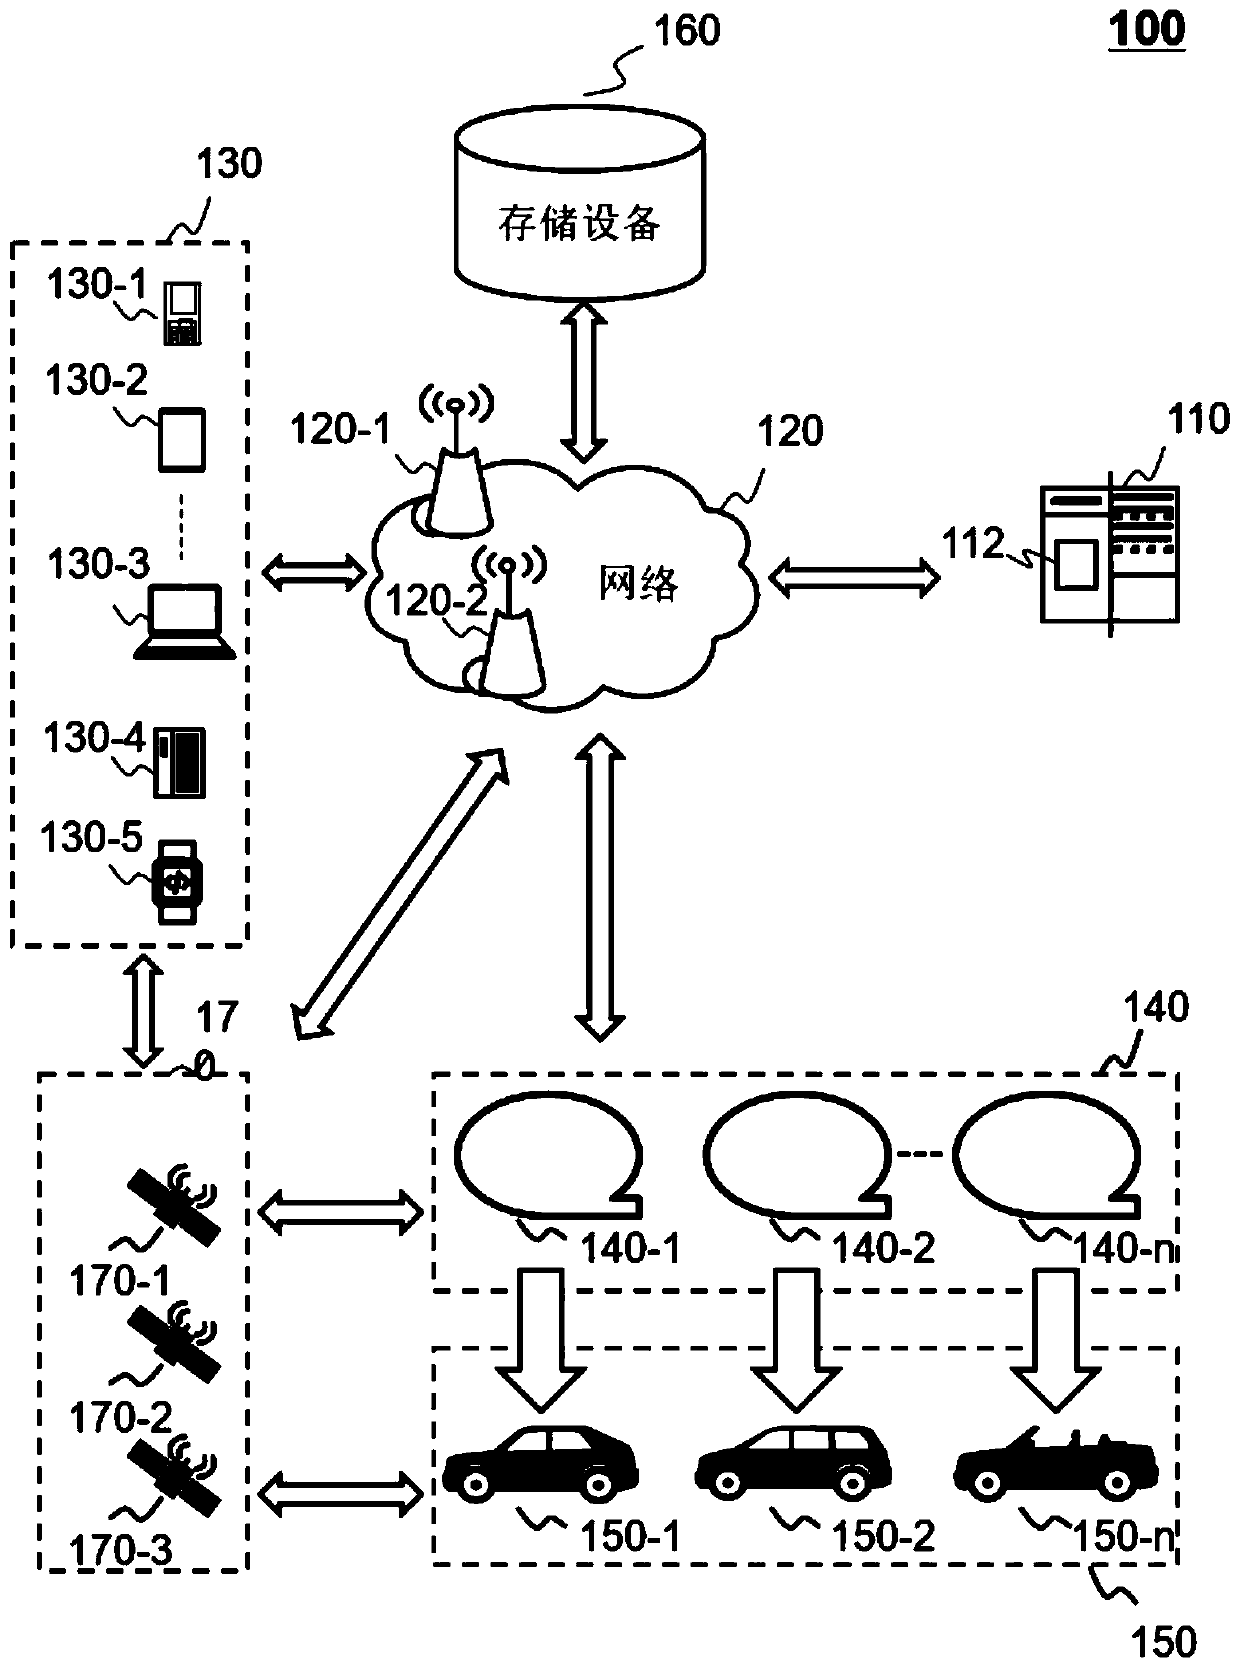 Systems and methods for identifying drunk requesters in online to offline service platform